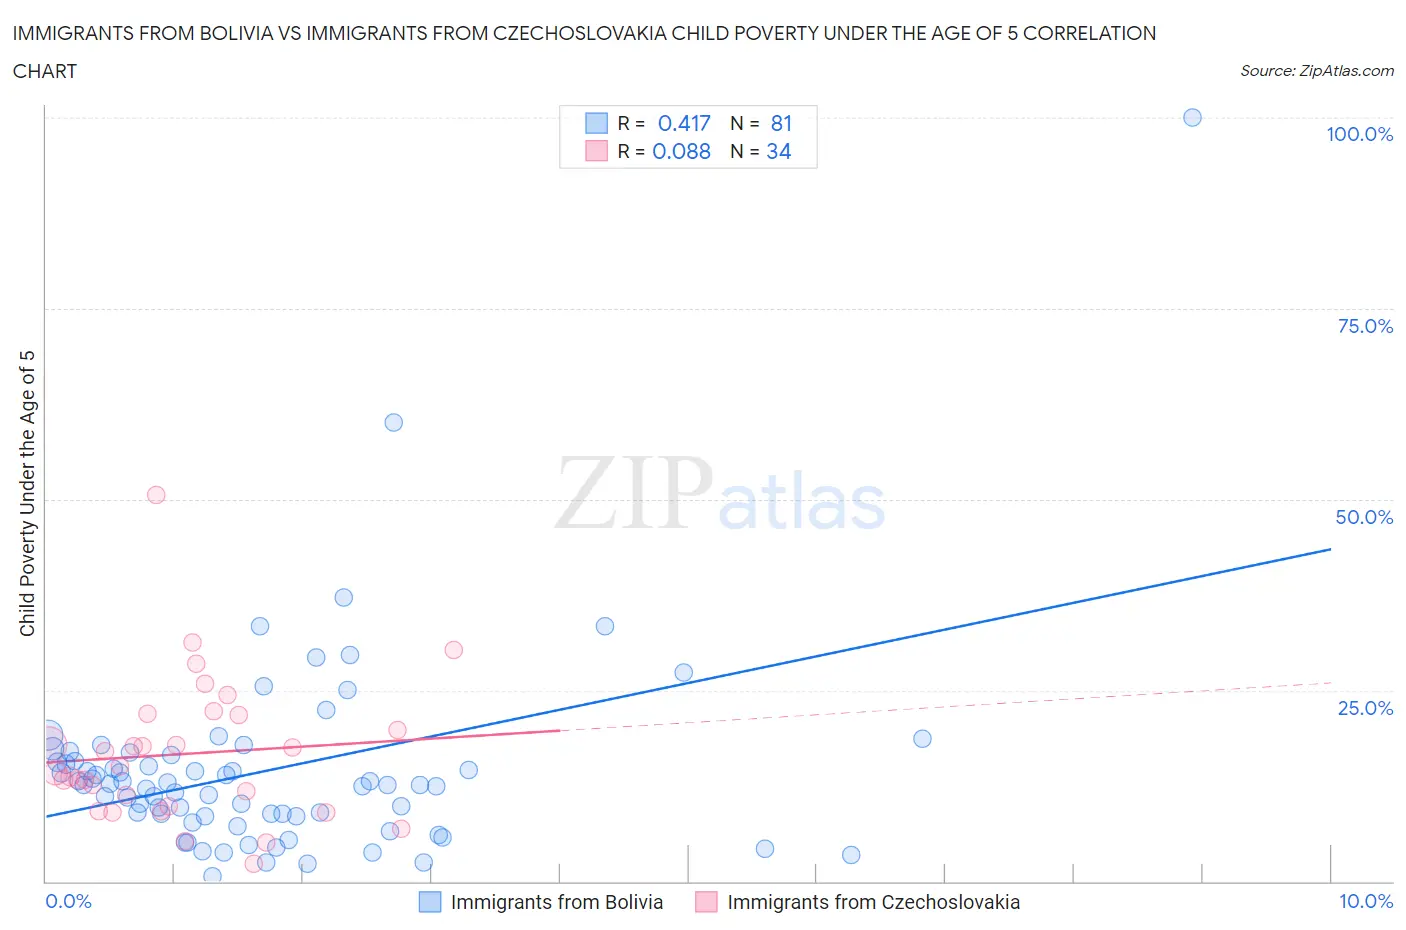 Immigrants from Bolivia vs Immigrants from Czechoslovakia Child Poverty Under the Age of 5